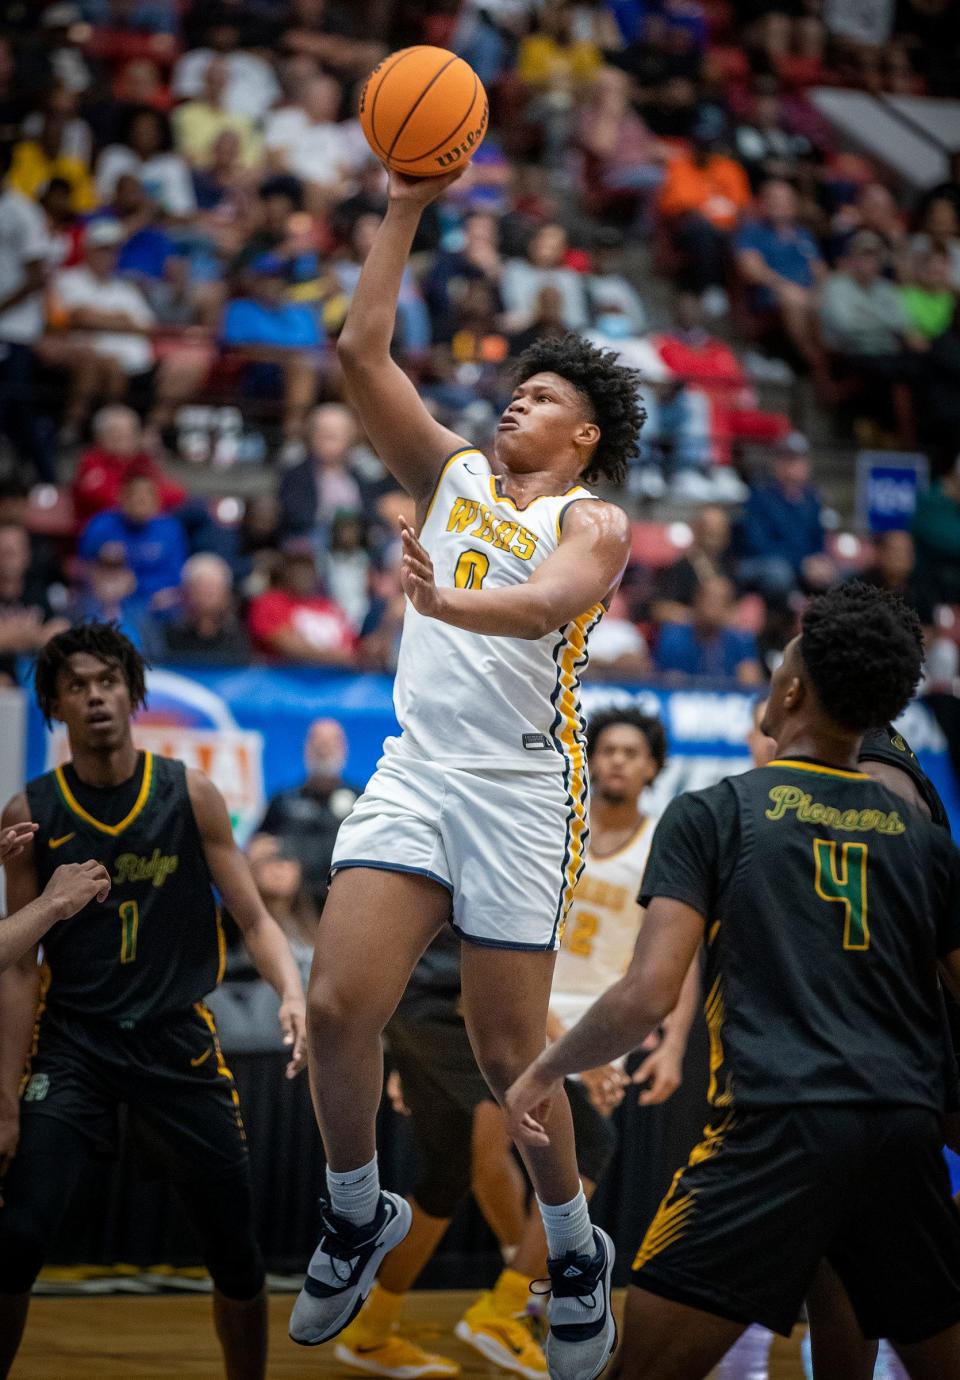 Winter Haven (0) Jamie Phillips Jr. drives to the basket over Oak Ridge during the 7A FHSSAA Semi final game at the RP Funding Center in Lakeland Fl  Friday March 3,2023. Winter Haven won 61-58 to advance to the state 7A title game. Ernst Peters/The Ledger